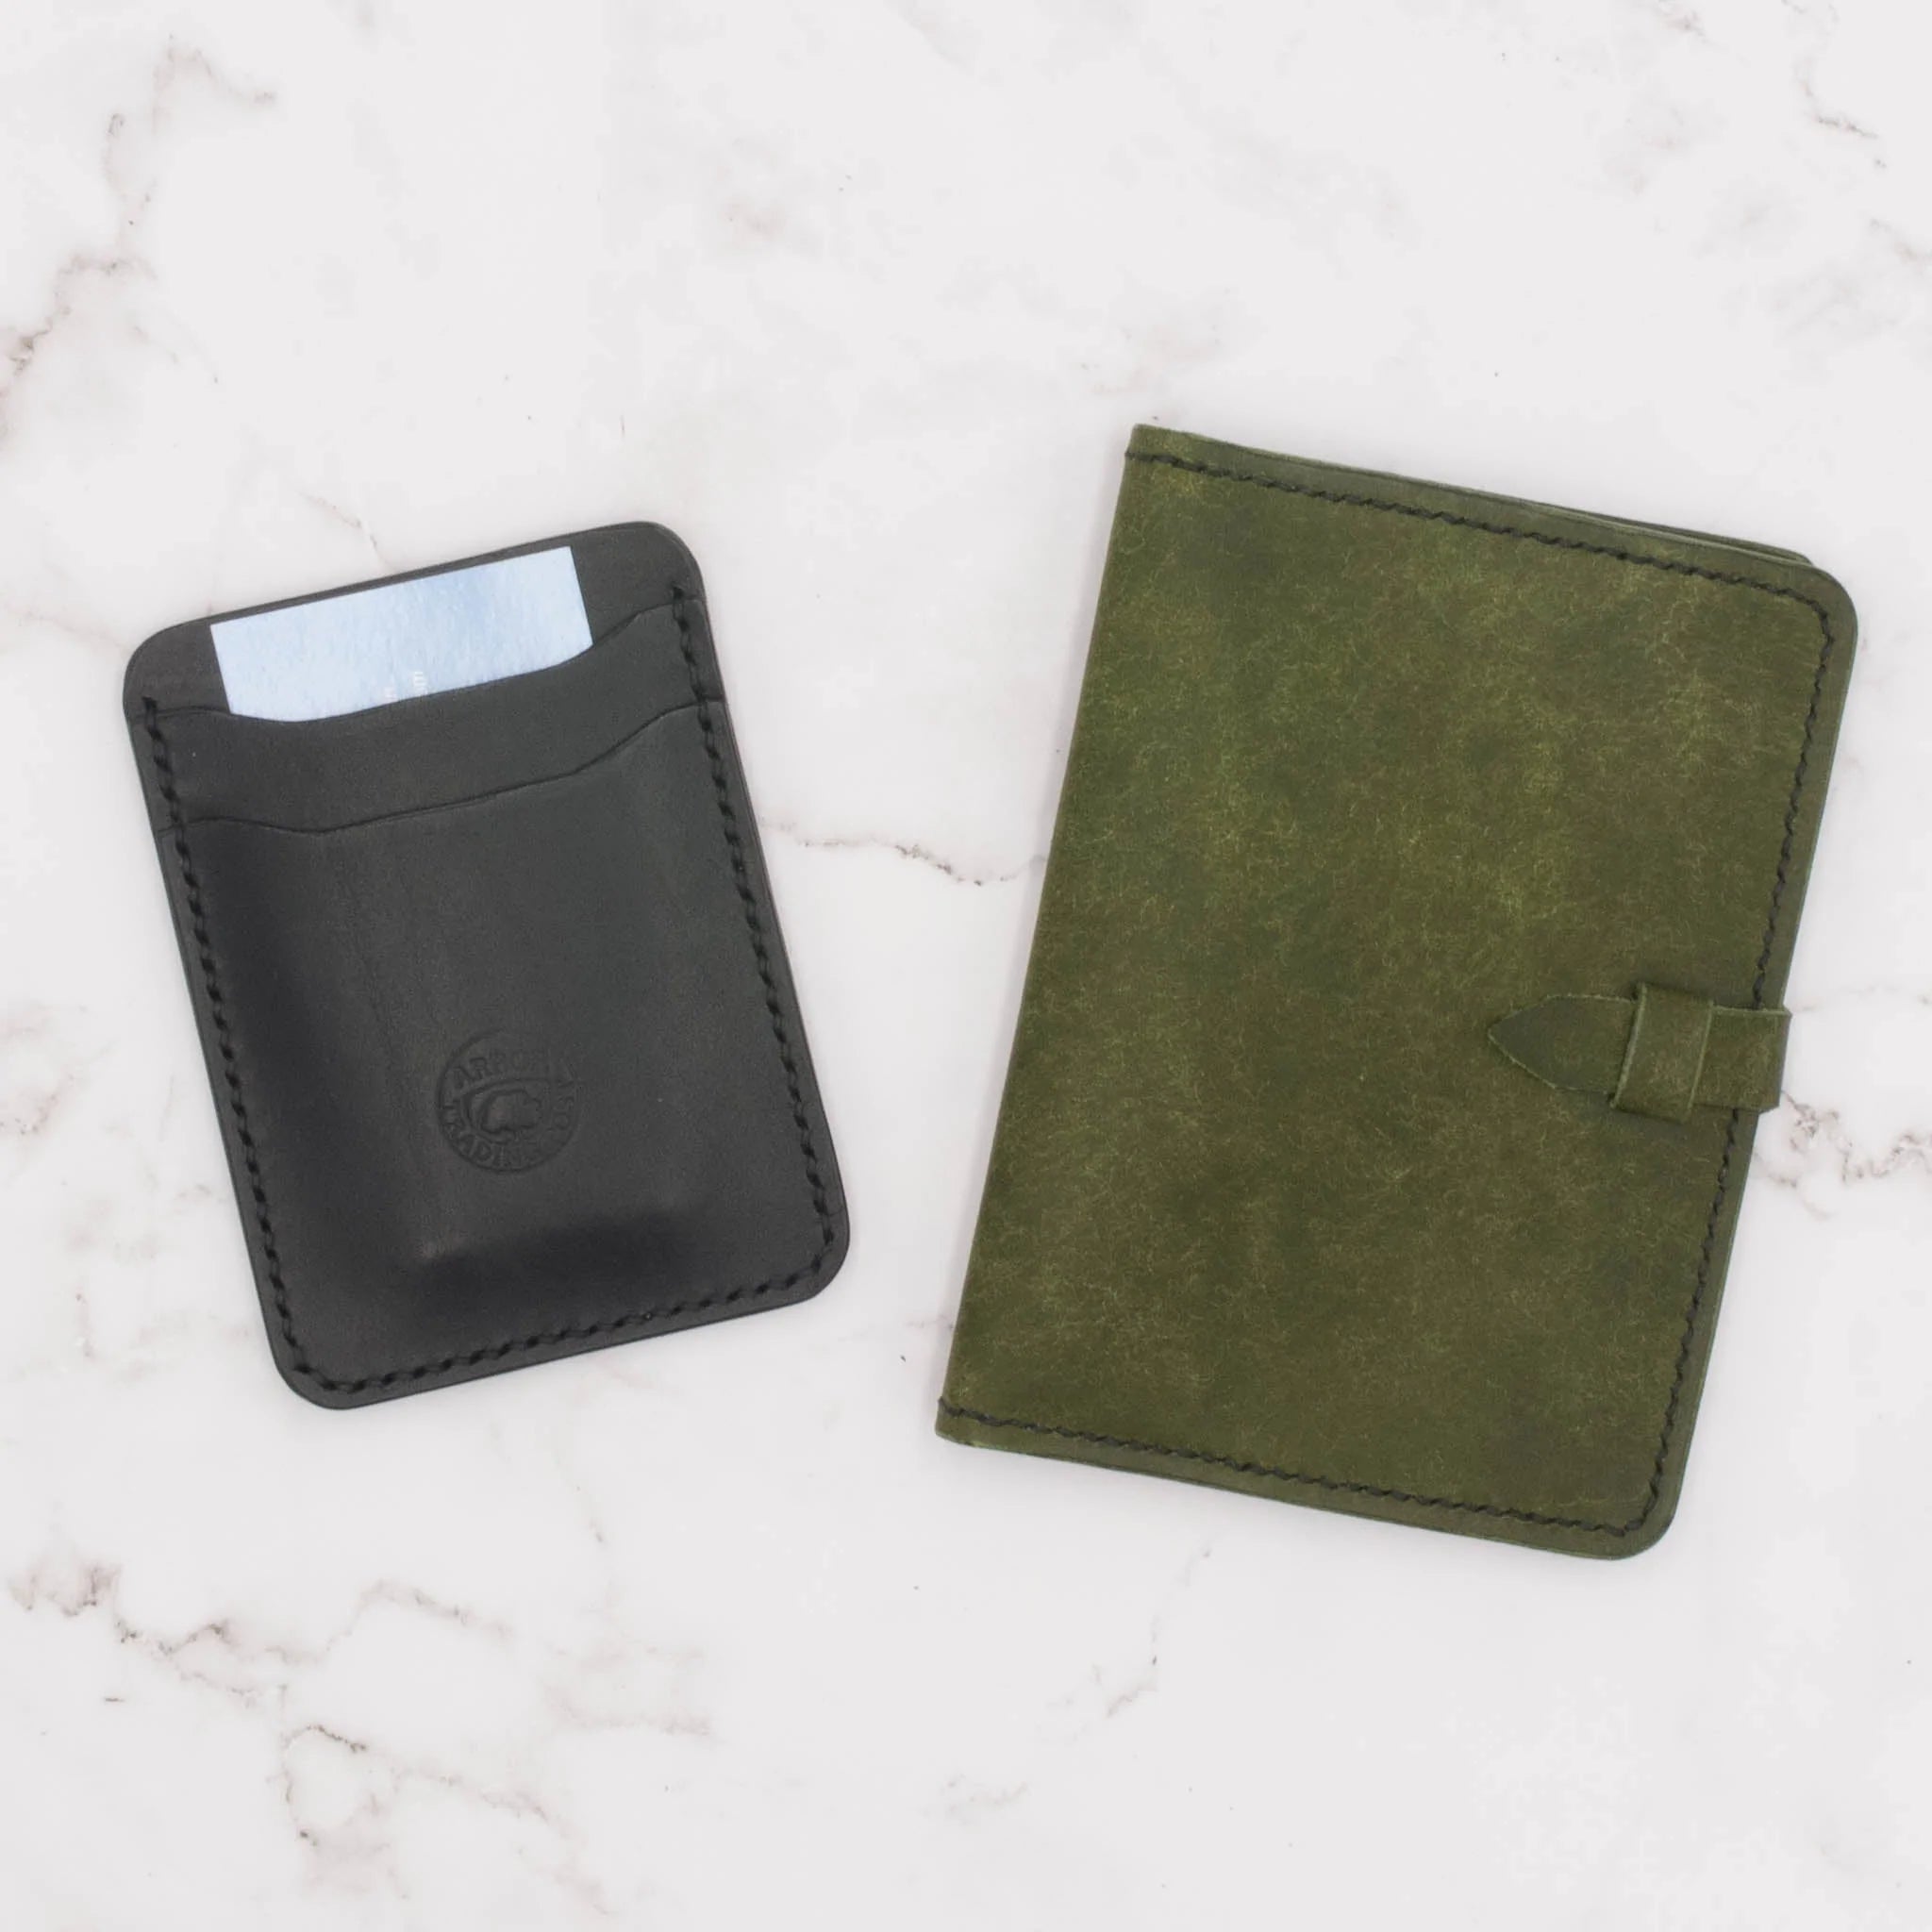 Arbor Trading Post Passport Cover Handcrafted Leather Passport Cover  - Olive Green